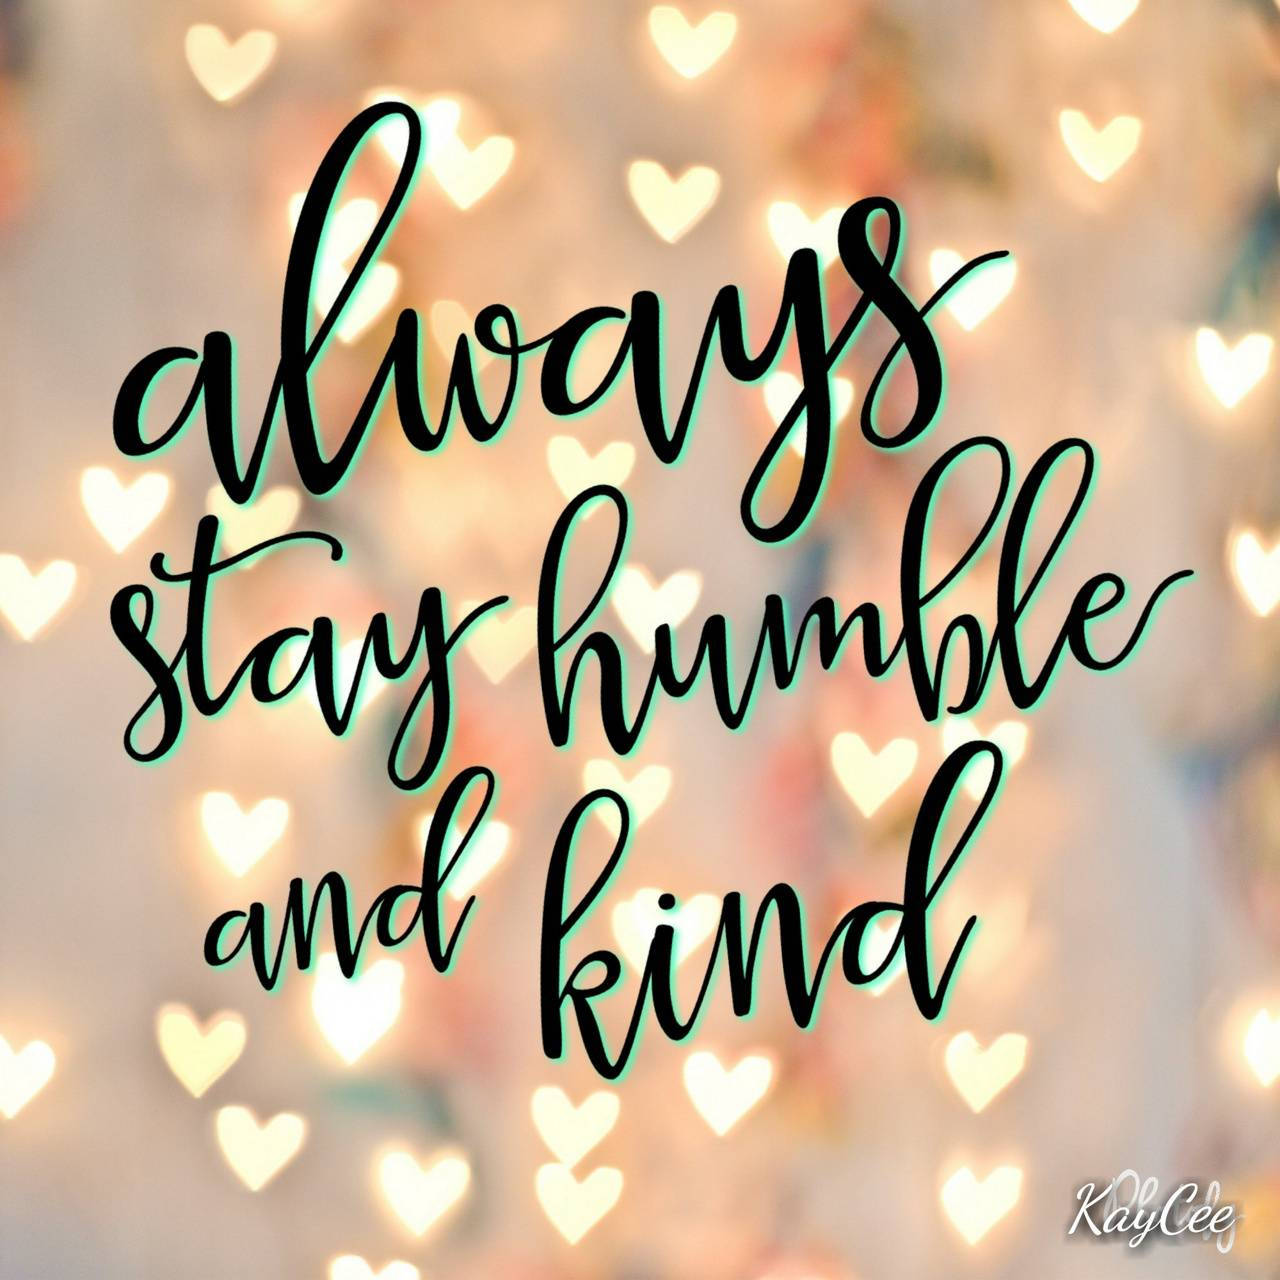 Girly Humble Quote Wallpaper